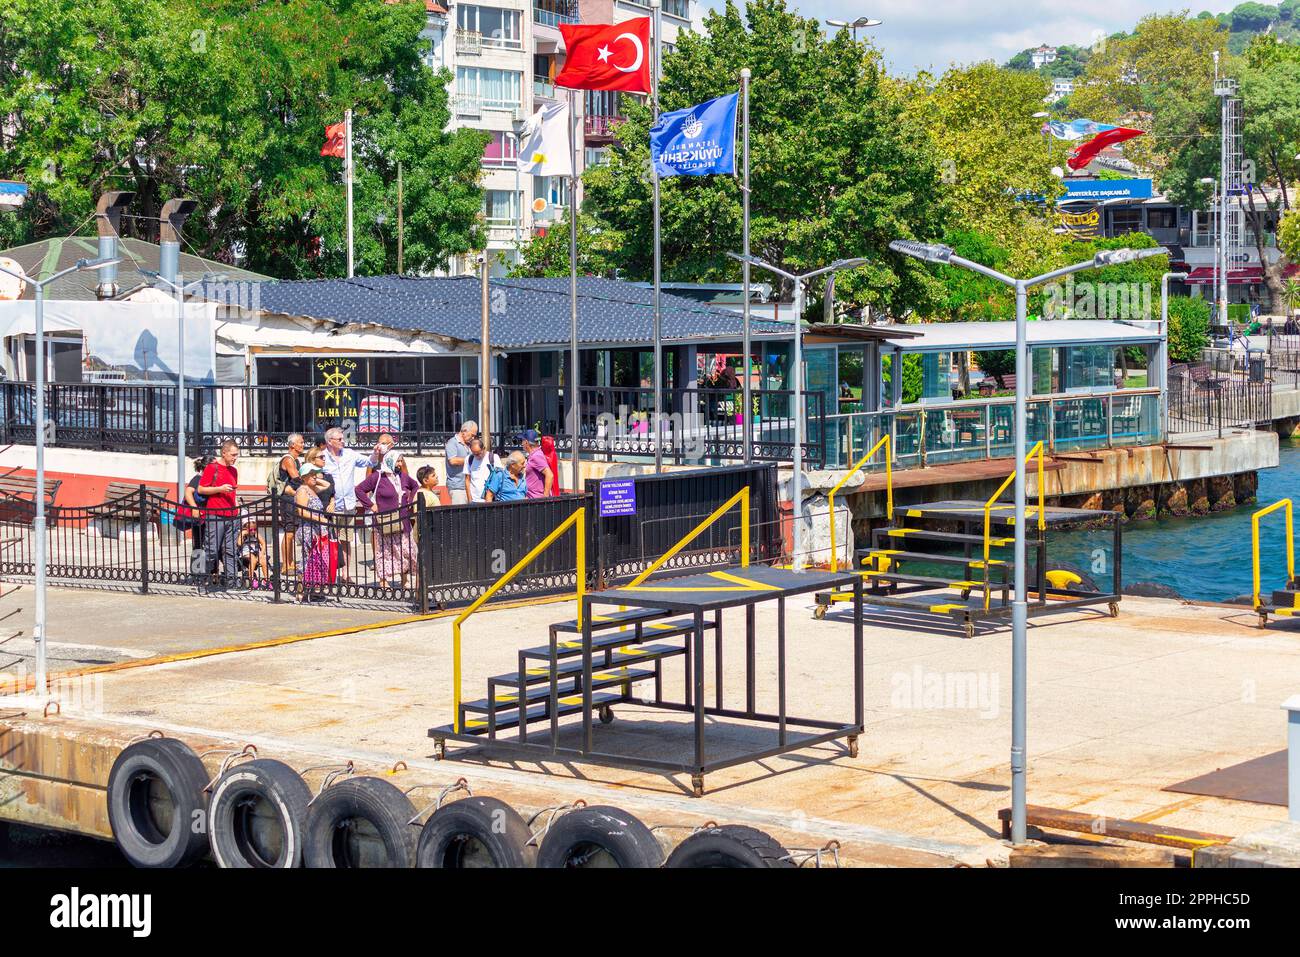 Bosphorus, Sariyer Ferry Terminal with with passangers waiting, and dense green trees, Istanbul, Turkey Stock Photo